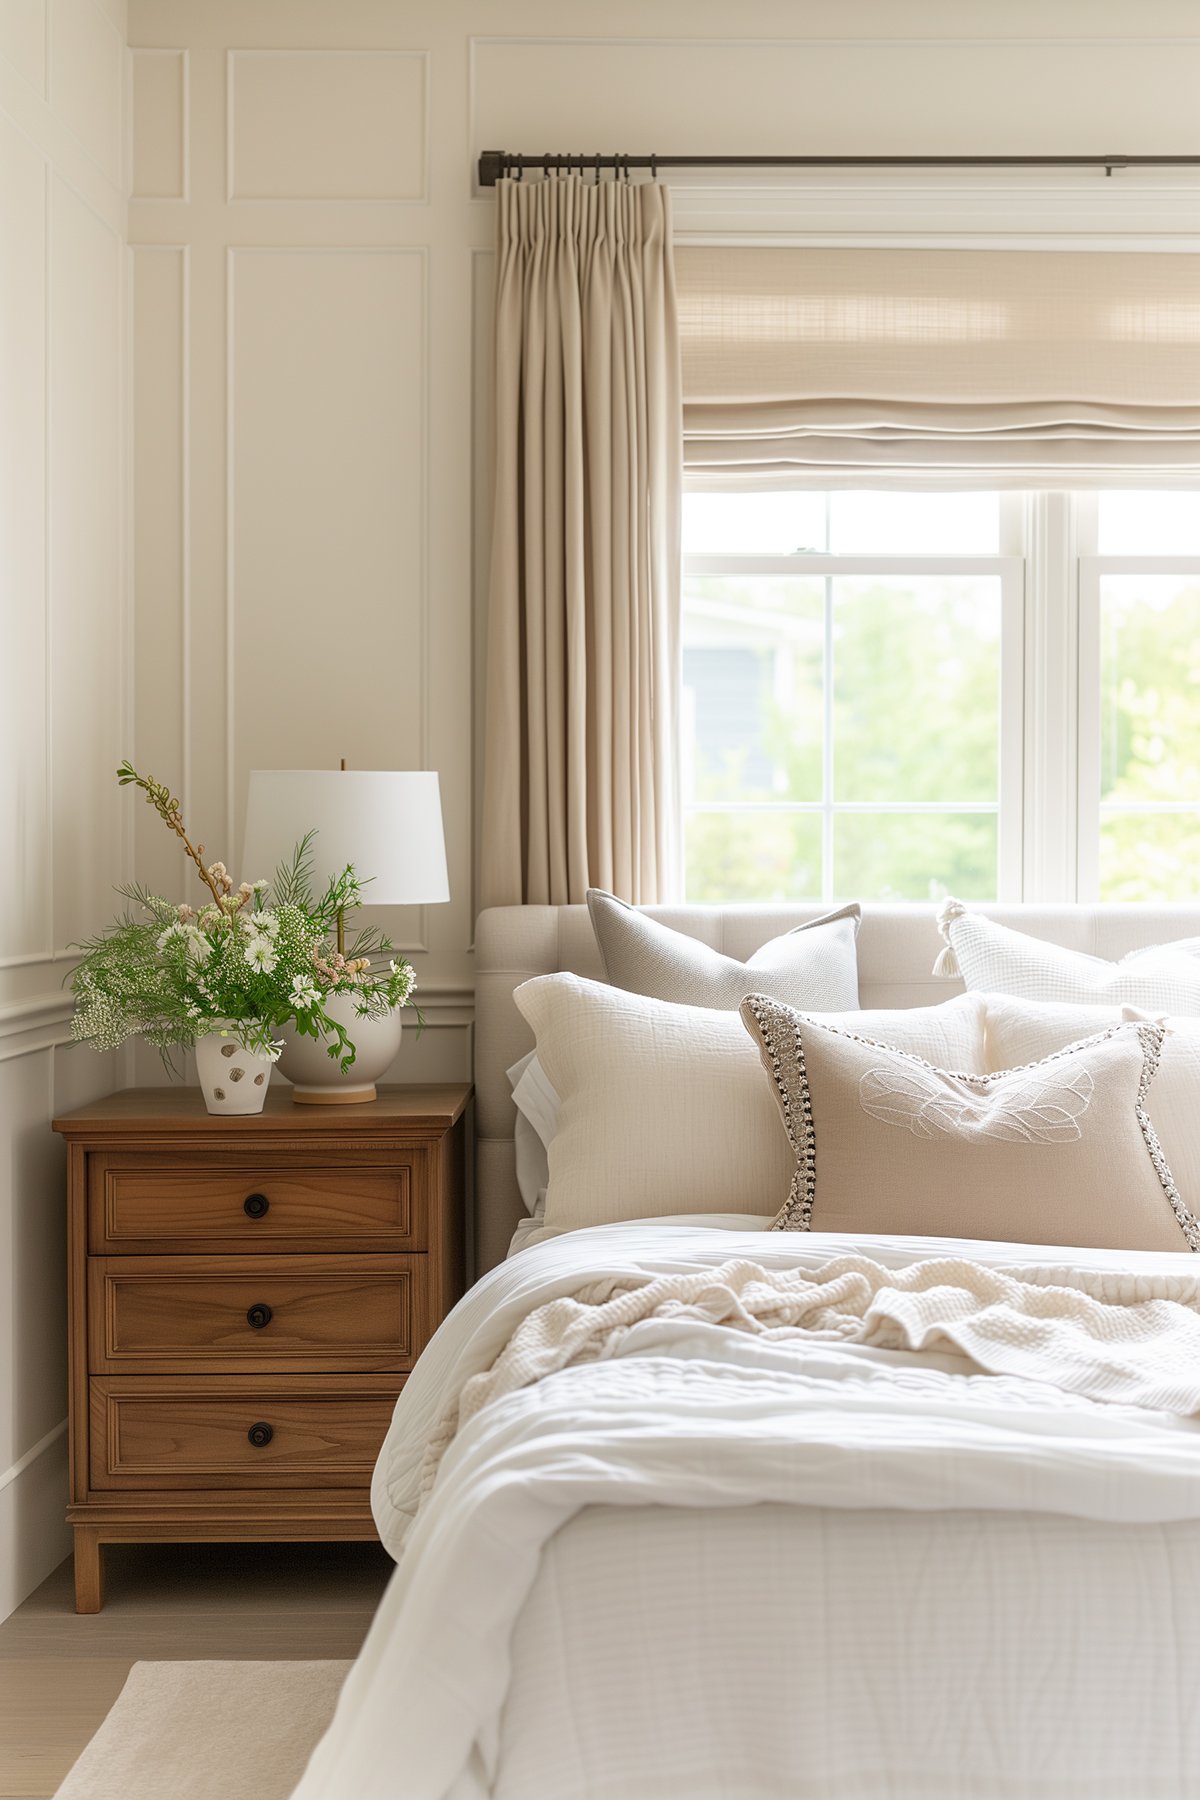 Coxy bedroom with neutral colors, a wood nightstand and walls painted Sherwin Williams Accessible Beige.